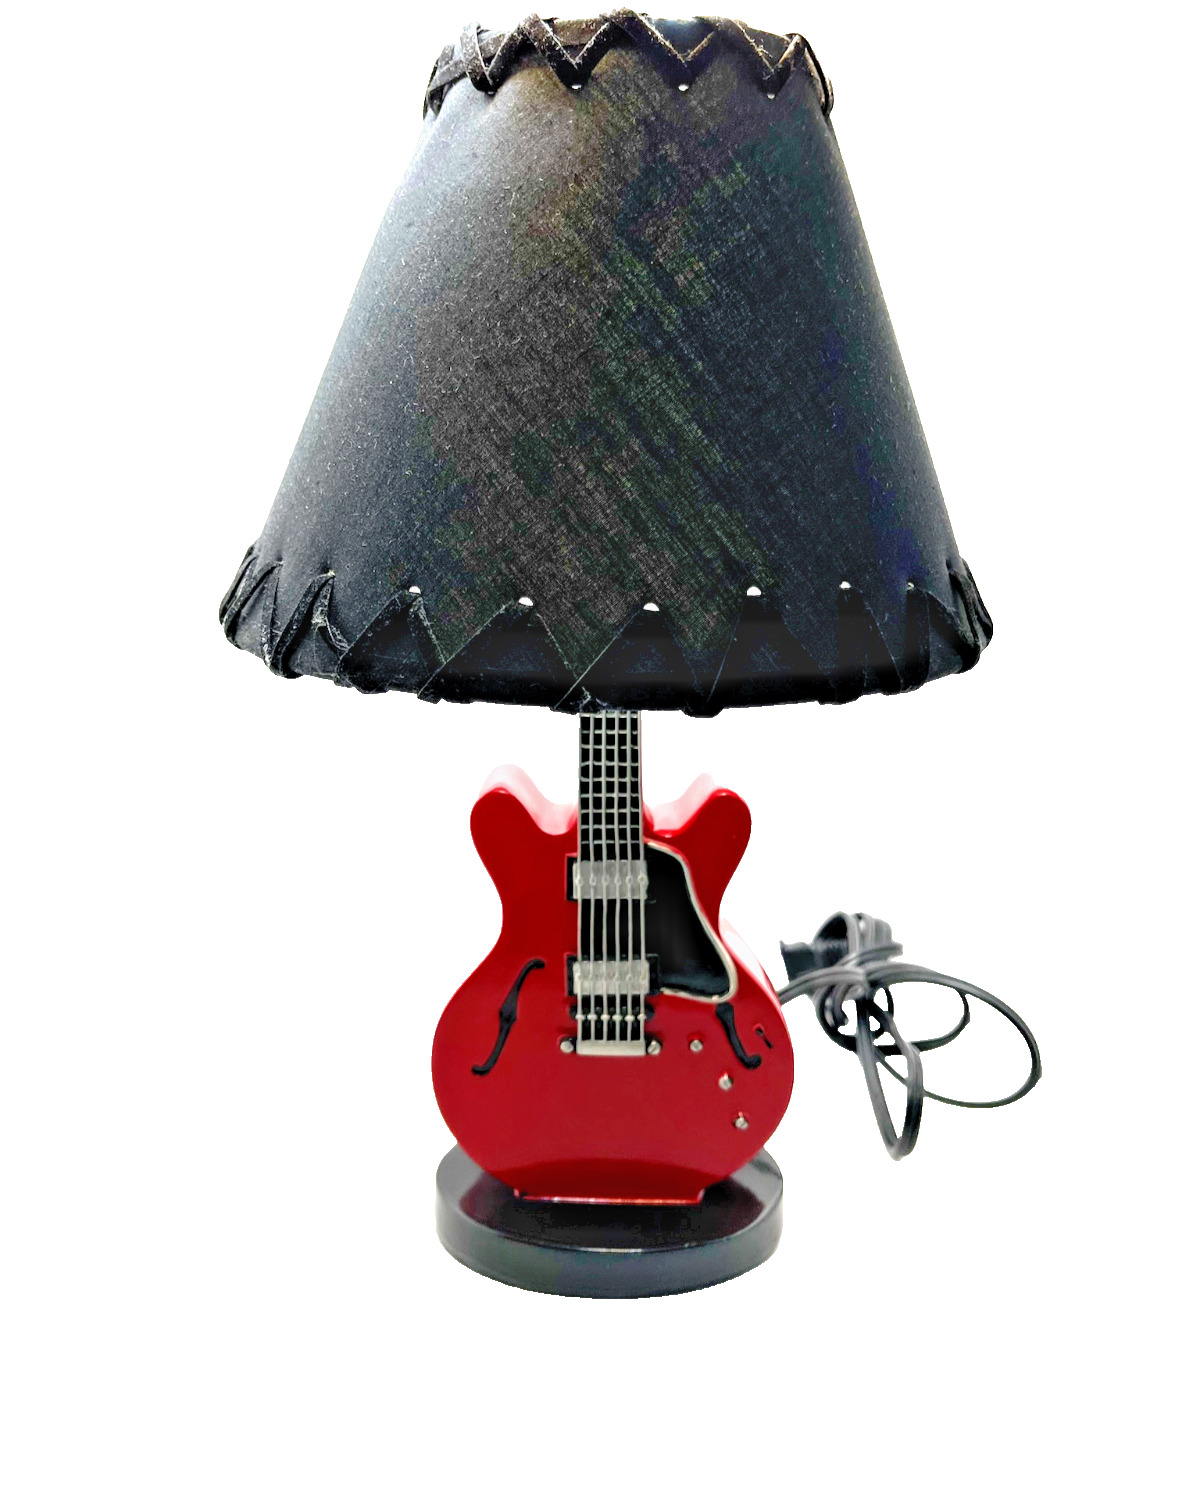 INLETTER Modern Creative Cartoon Desk Lamp Red Guitar In Mint Condition